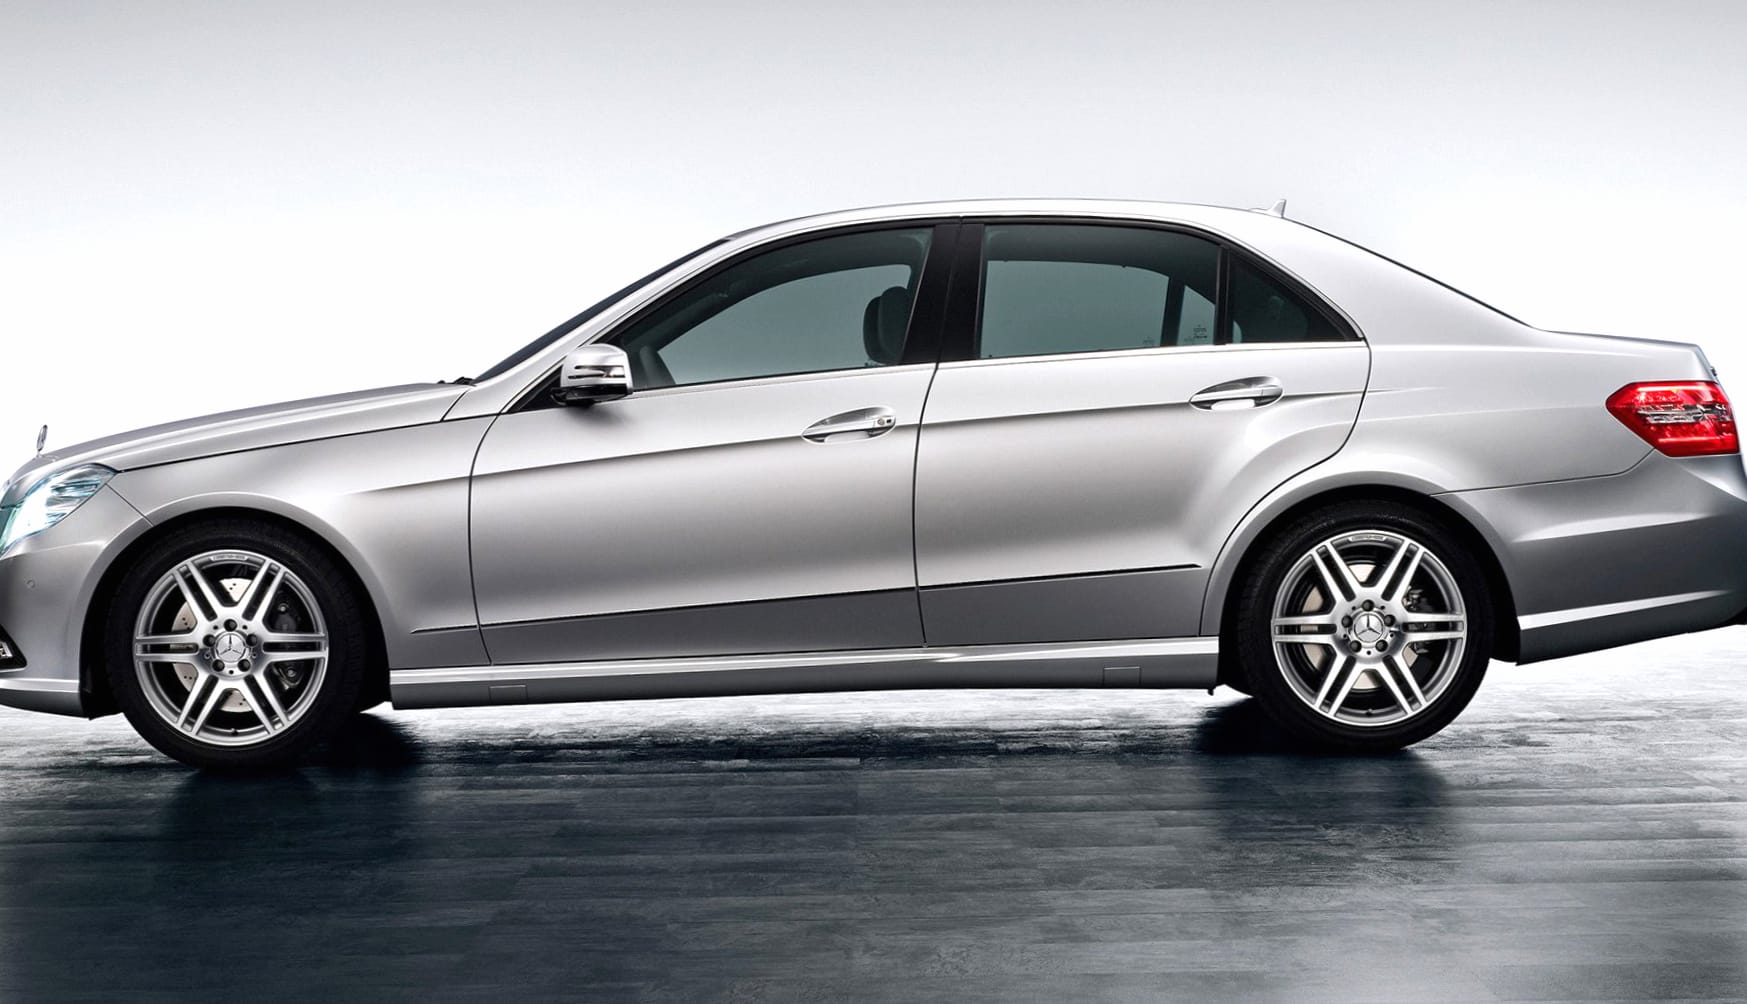 Mercedes-Benz E 500 AMG Styling wallpapers HD quality